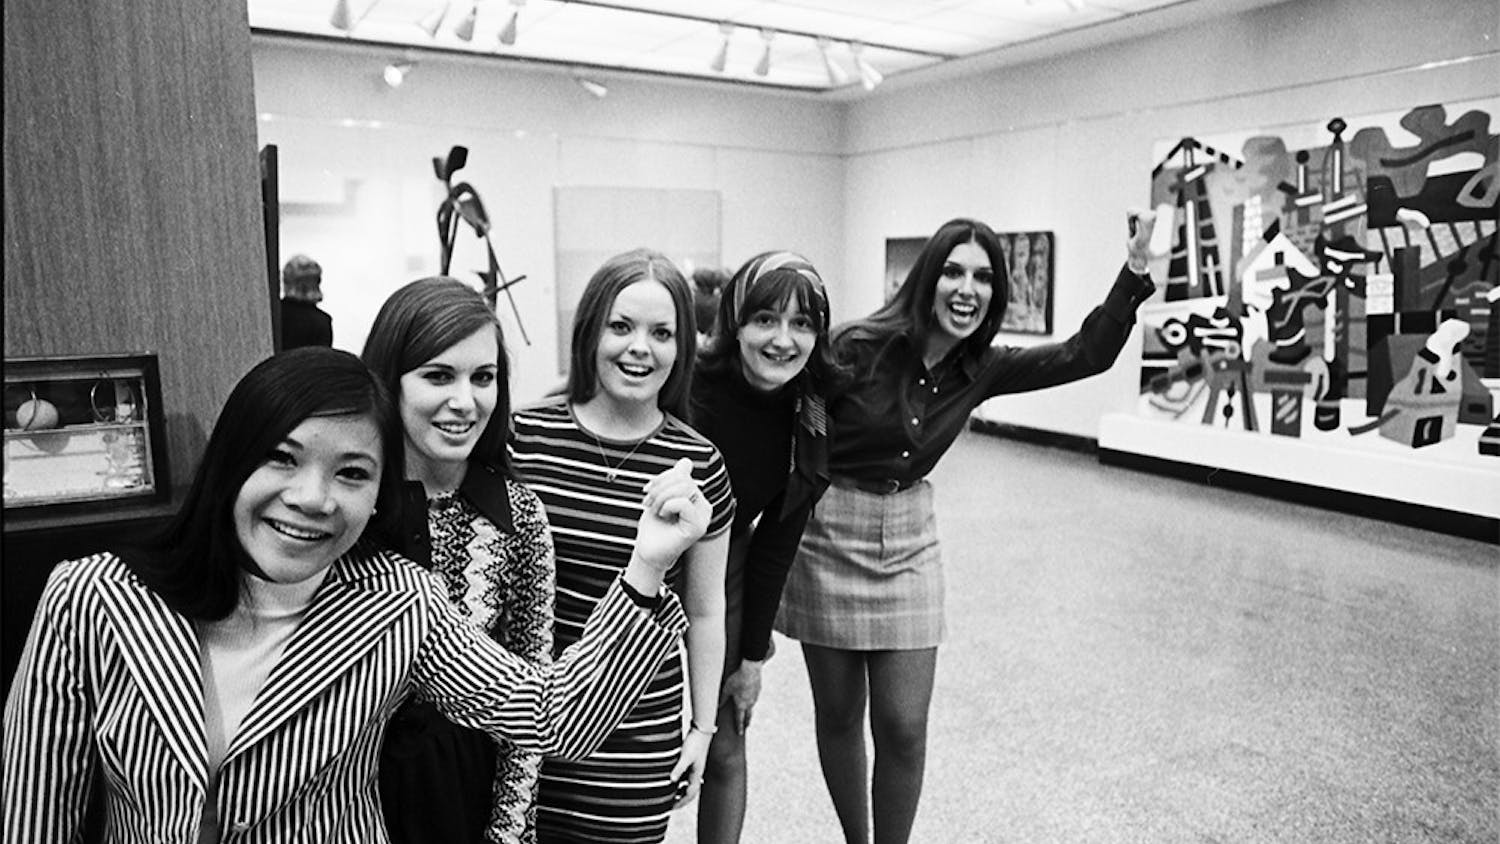 In 1972, five members of the Senior Class Council line up to guide a Women's Day tour of the Fine Arts Building. Though the IU Art Museum was founded in 1941, its present building was not build until 1982.